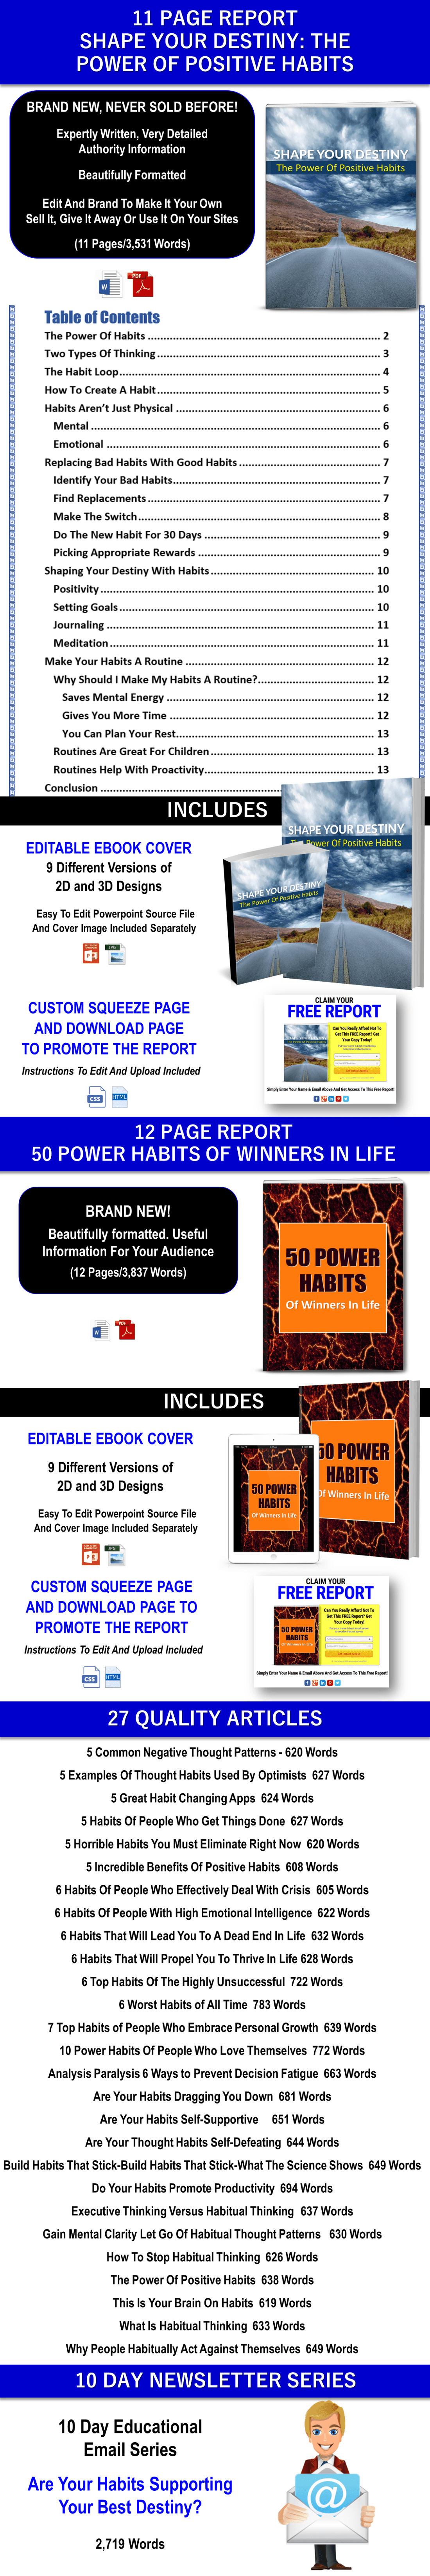 Power Of Habits In Shaping Our Destiny Content With PLR Rights